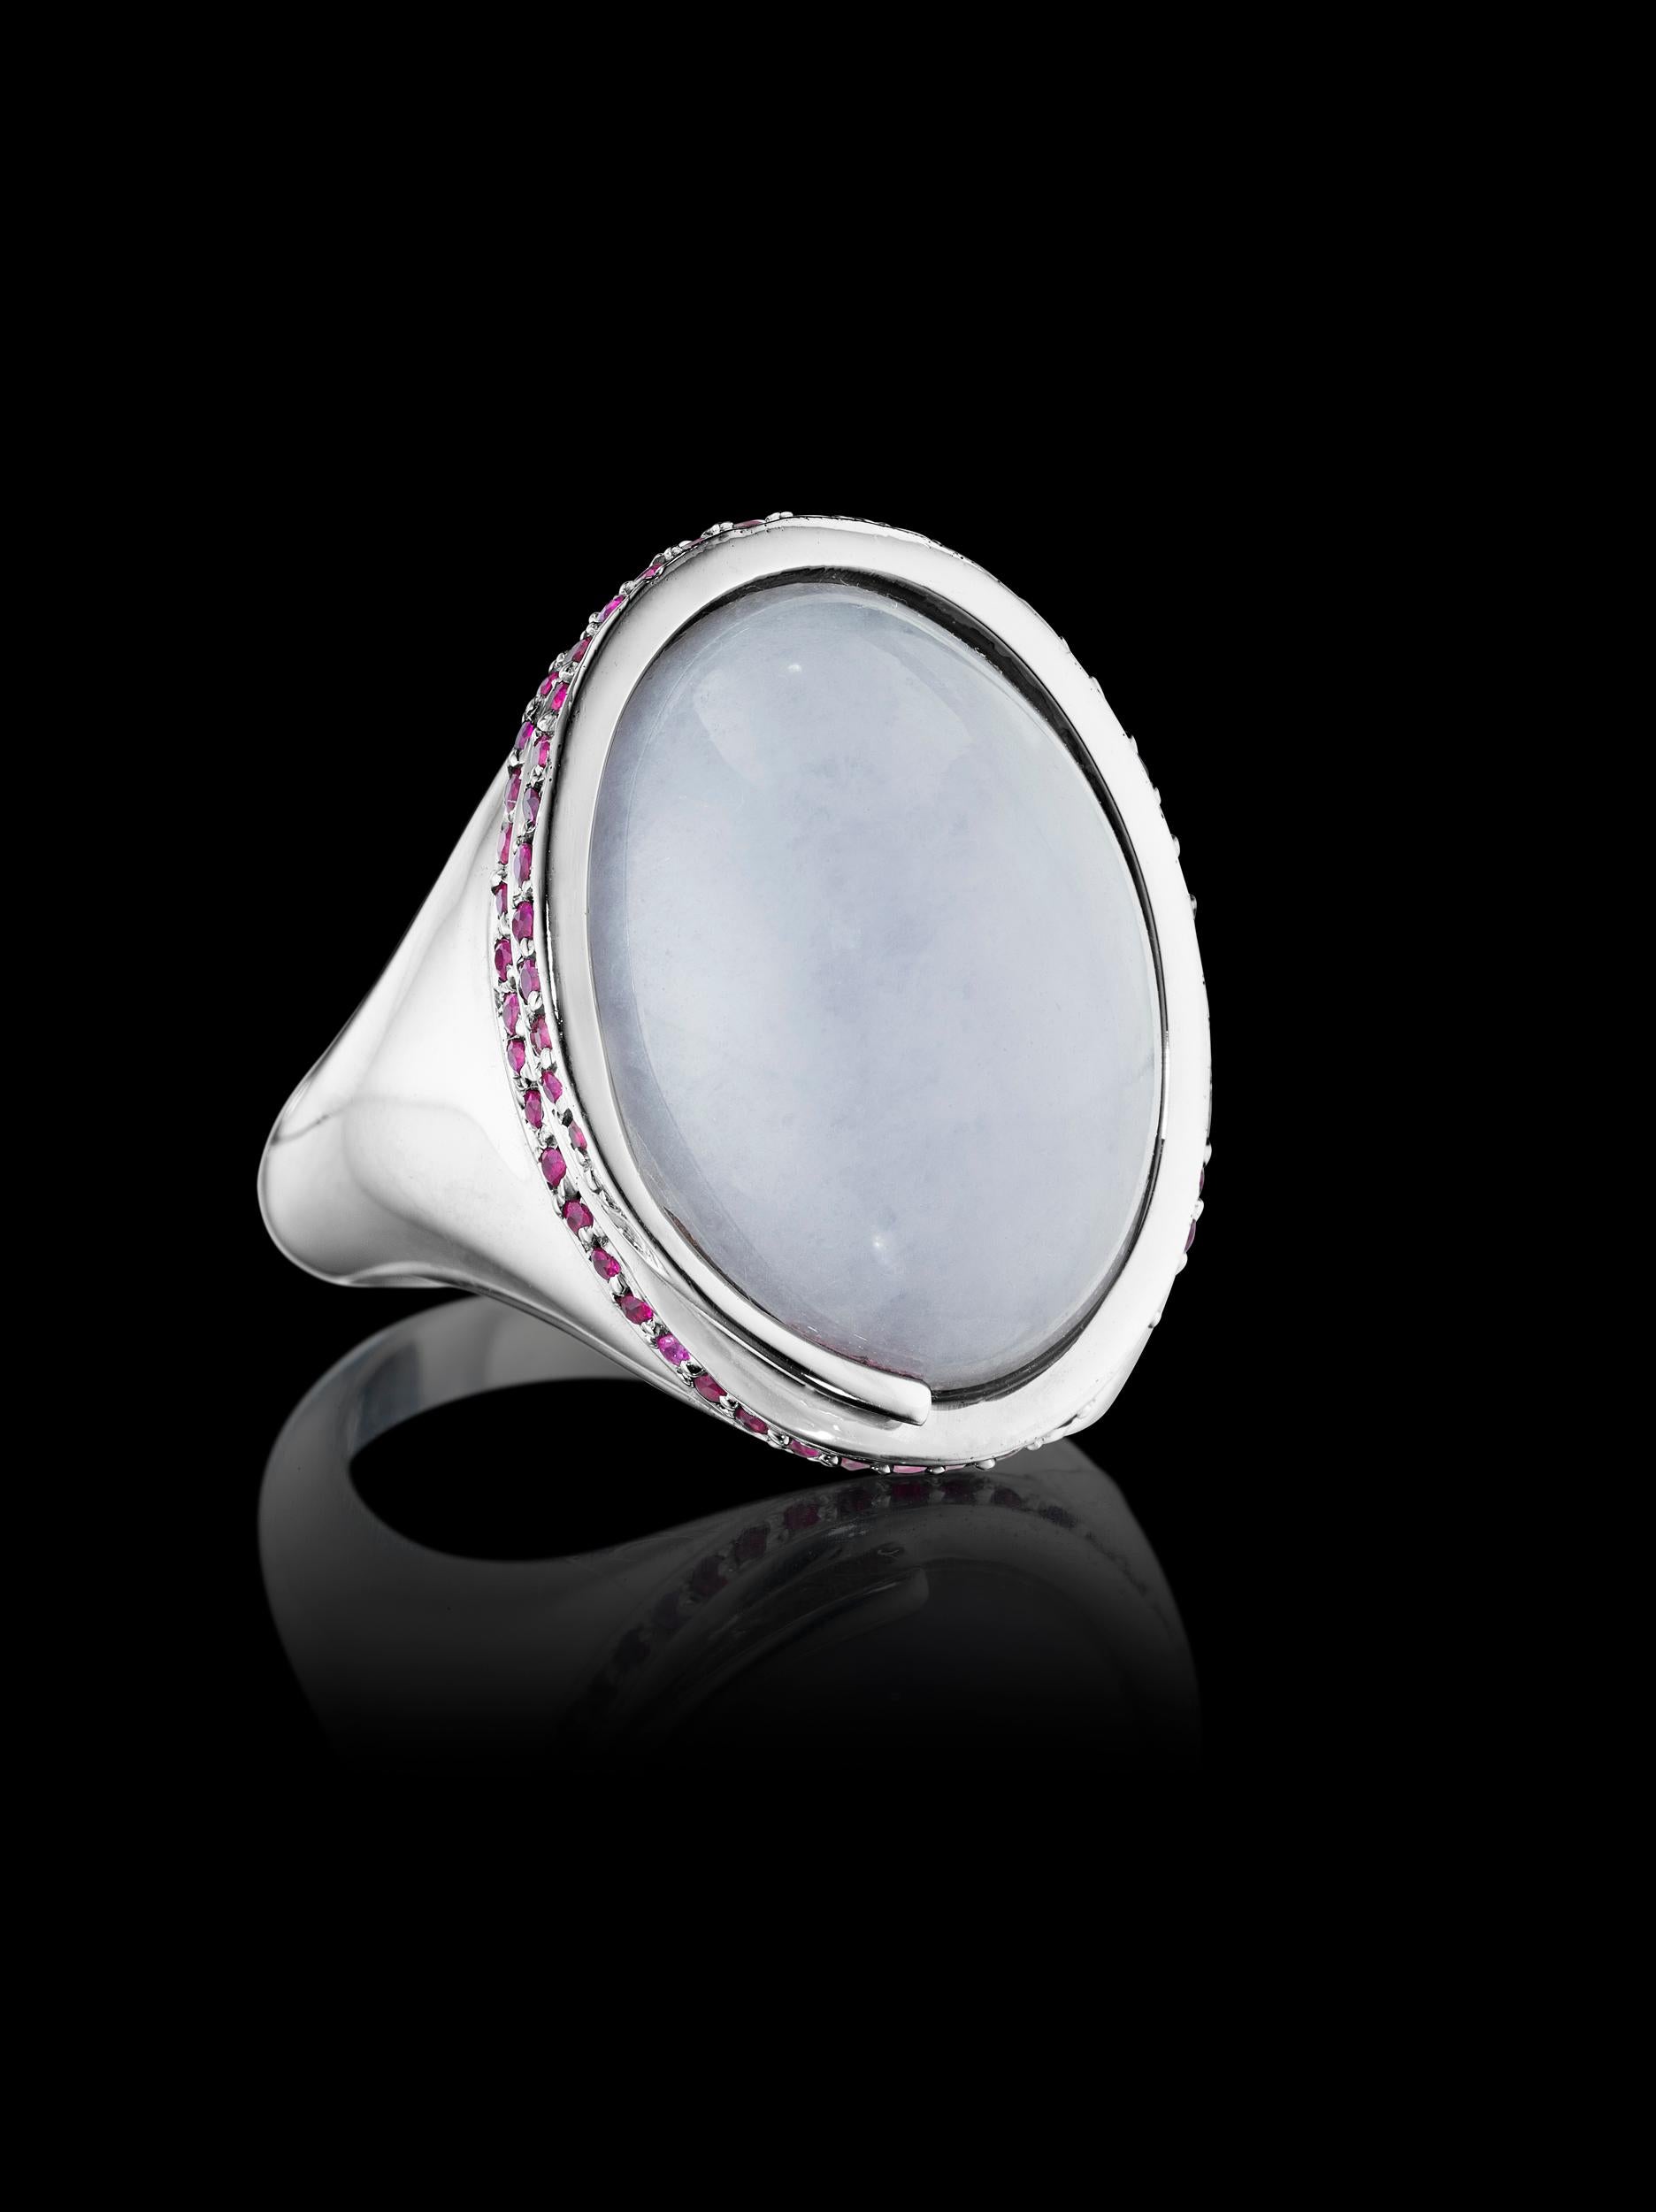 Ring features Lavender Jade and Rubies, creating an enchanting elegance from Pure Life Collection, inspired by a ballerina dancing gracefully effortlessly. Ring is set in 18k white gold. 

Size 7.5 

Center stone:  18x14x6.5mm, 14.61 ct.